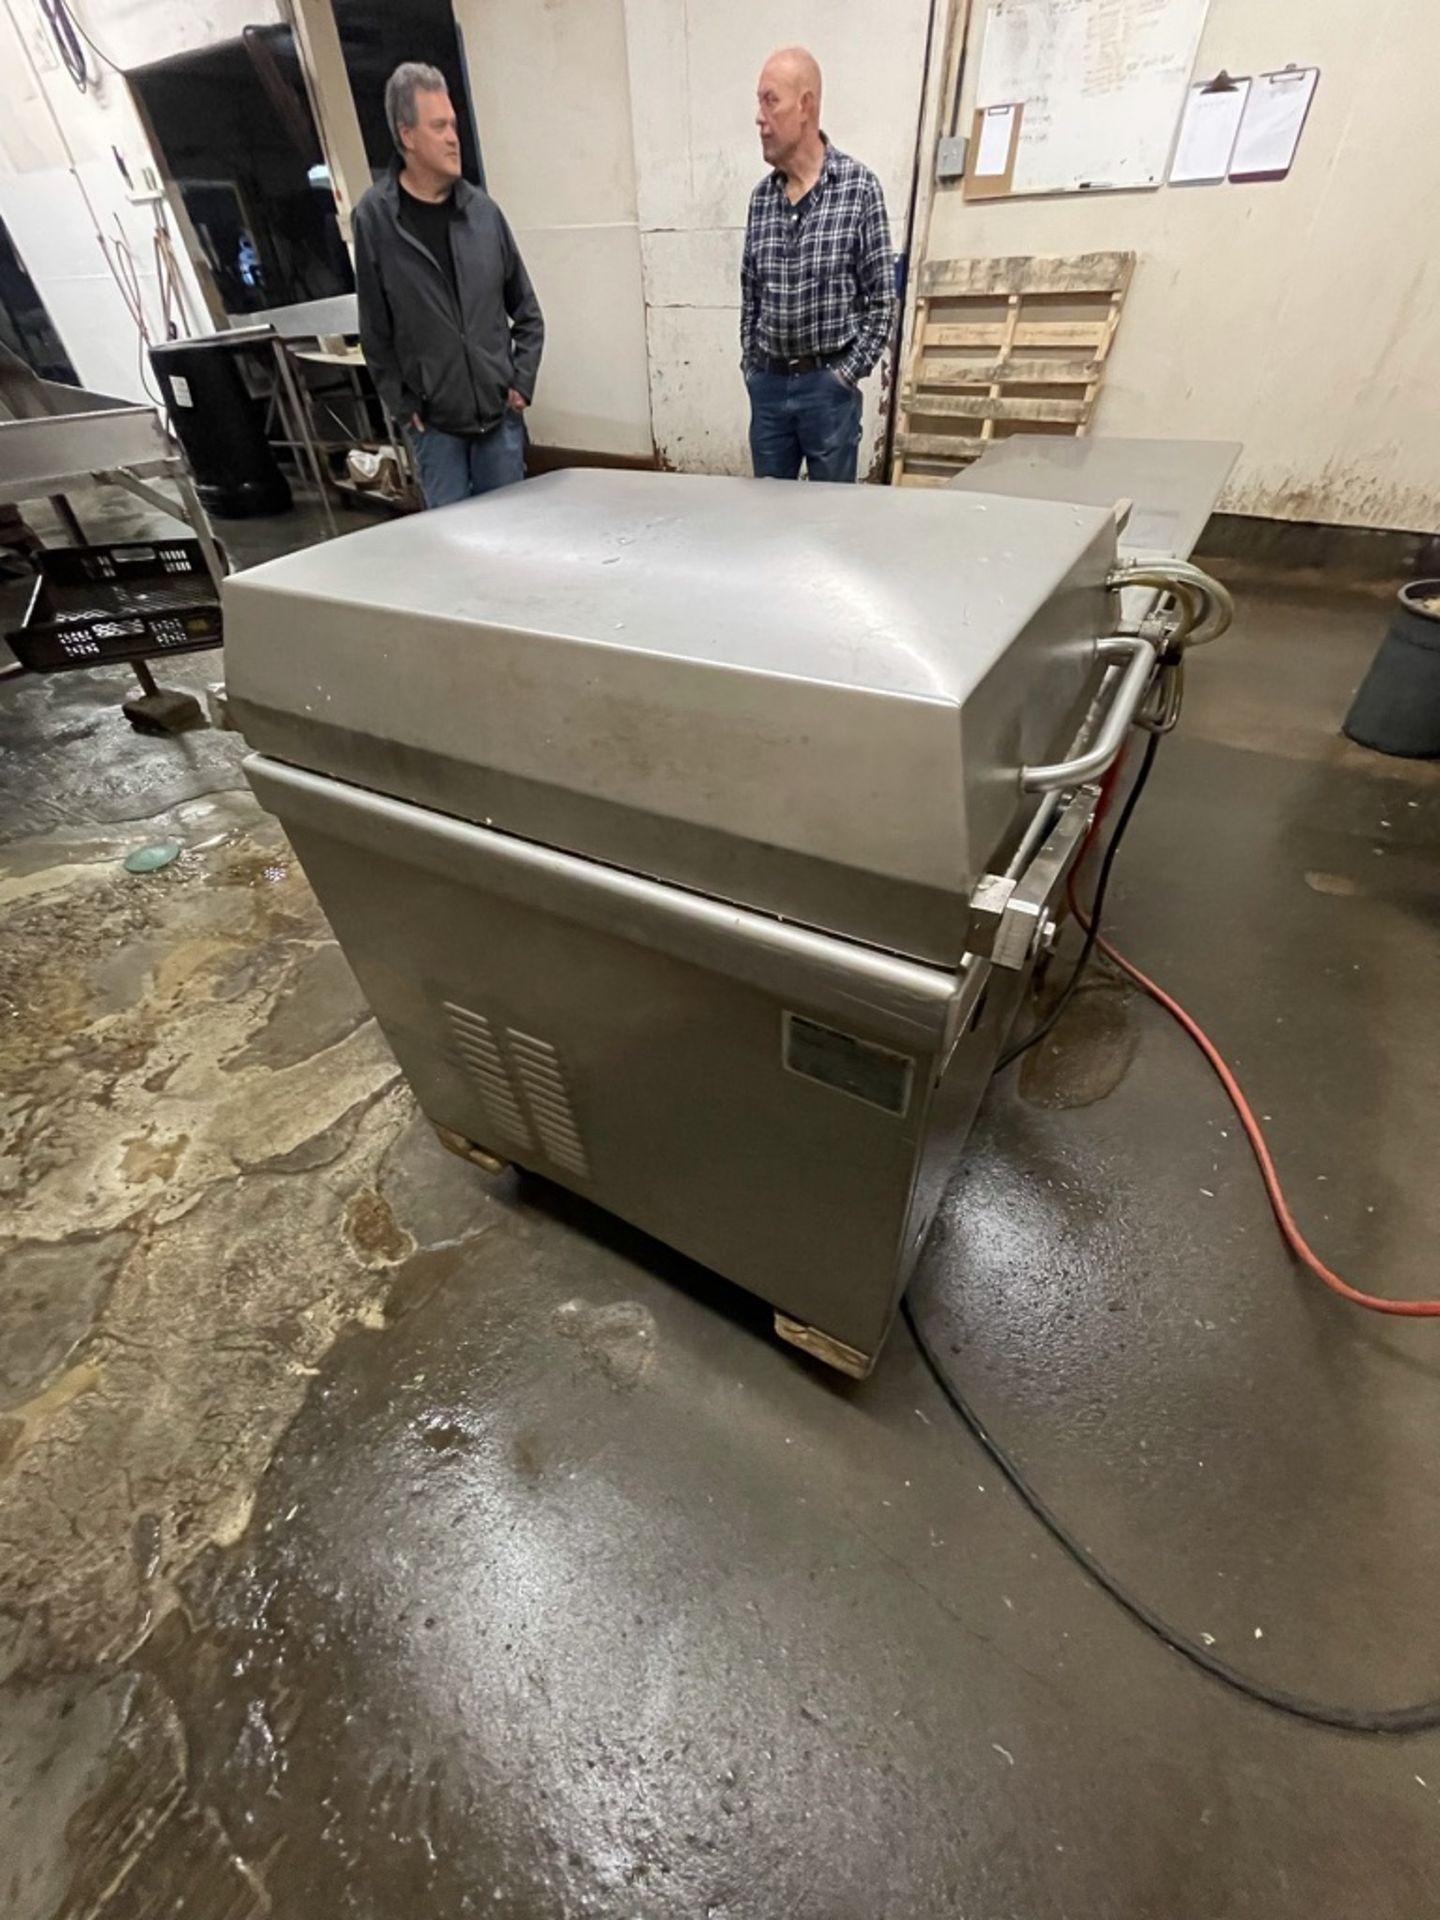 MULTIVAC CHAMBER SEALER, MODEL C450,S/N 105643, CHAMBER APPROX. 26" X 22", ONBOARD VACUUM PUMP, - Image 11 of 23